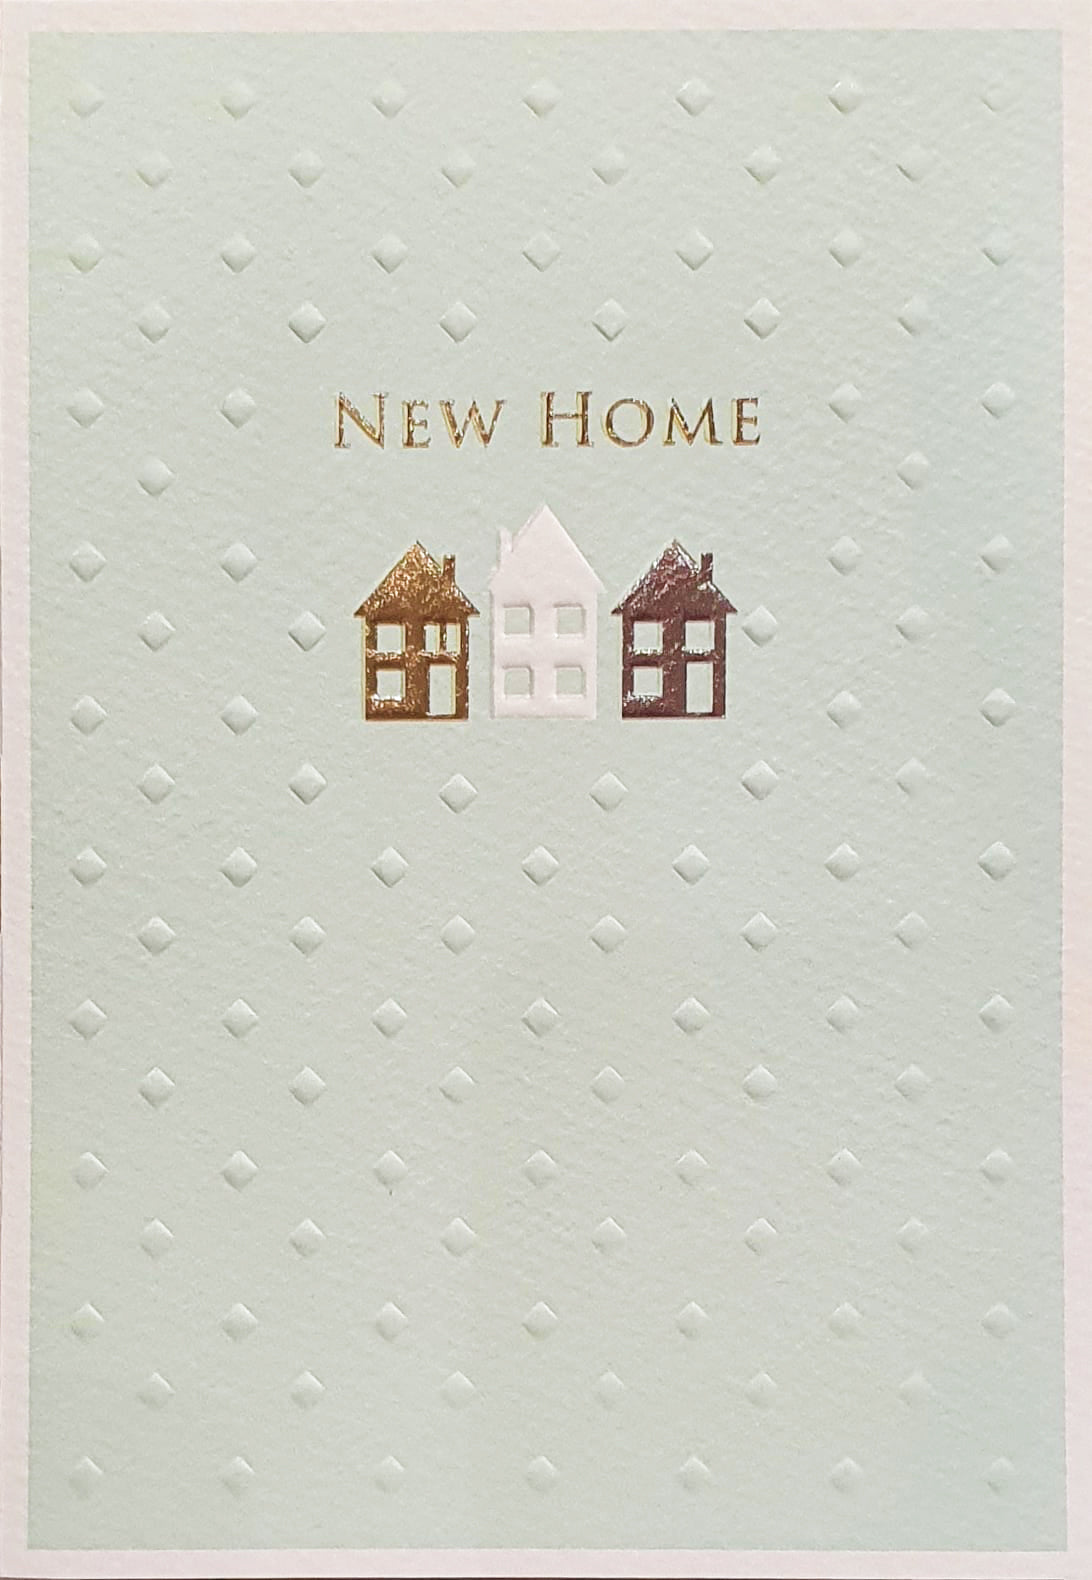 New Home Card - Exceptional New Home